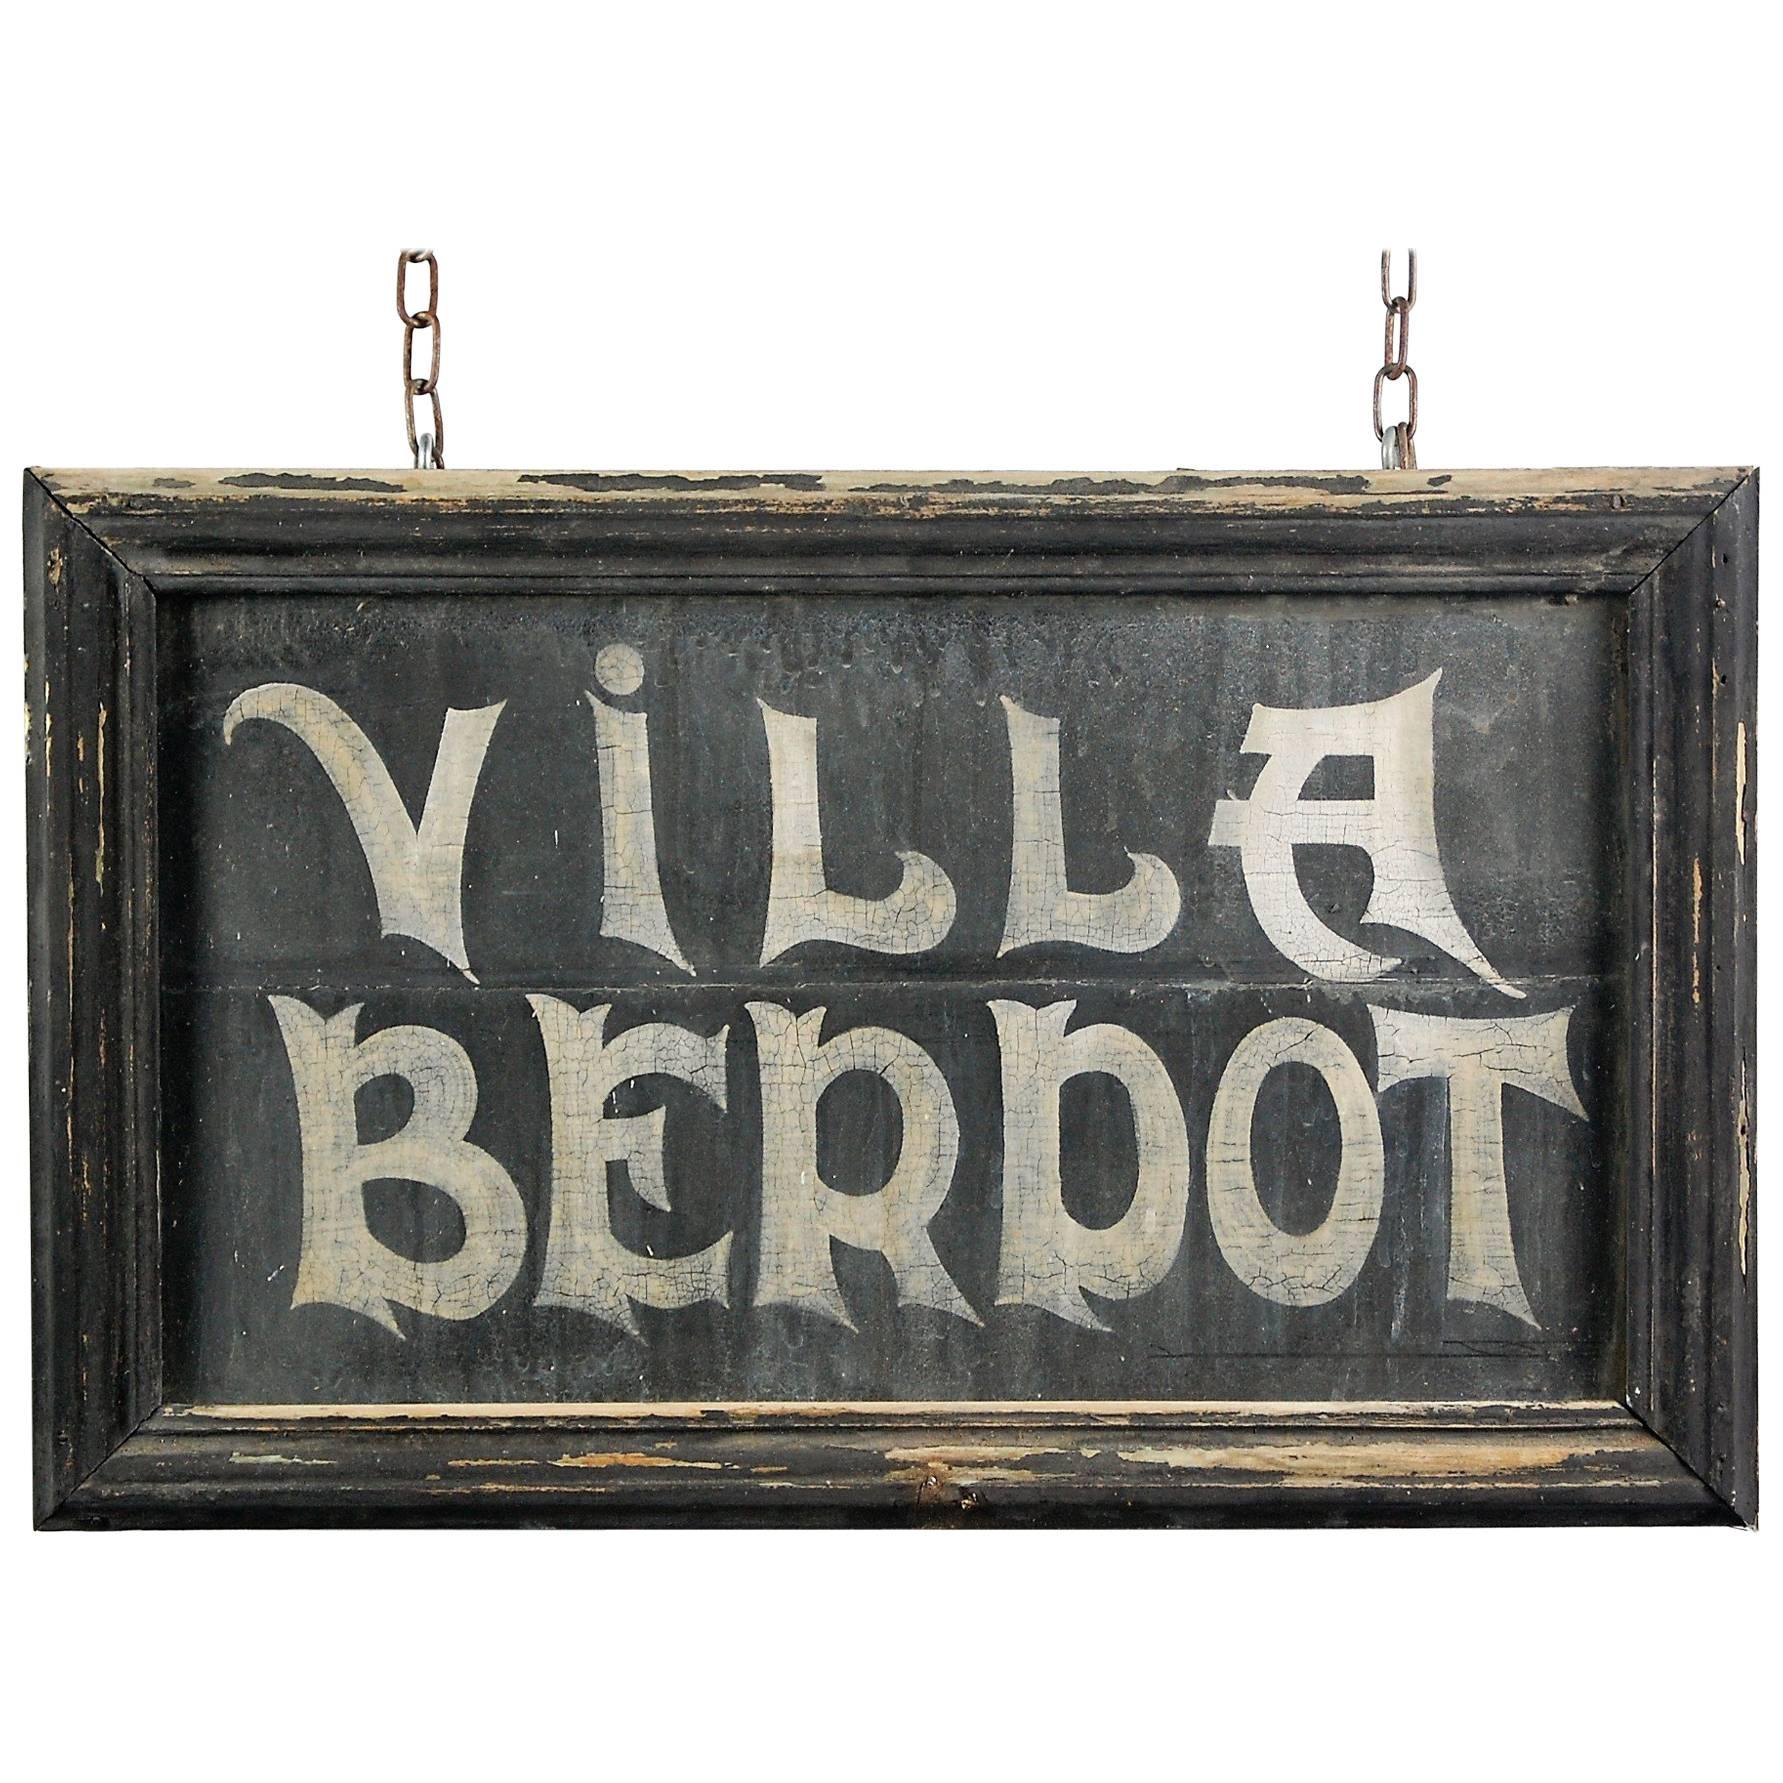 Early 20th Century, Villa Berpot Hand-Painted Sign